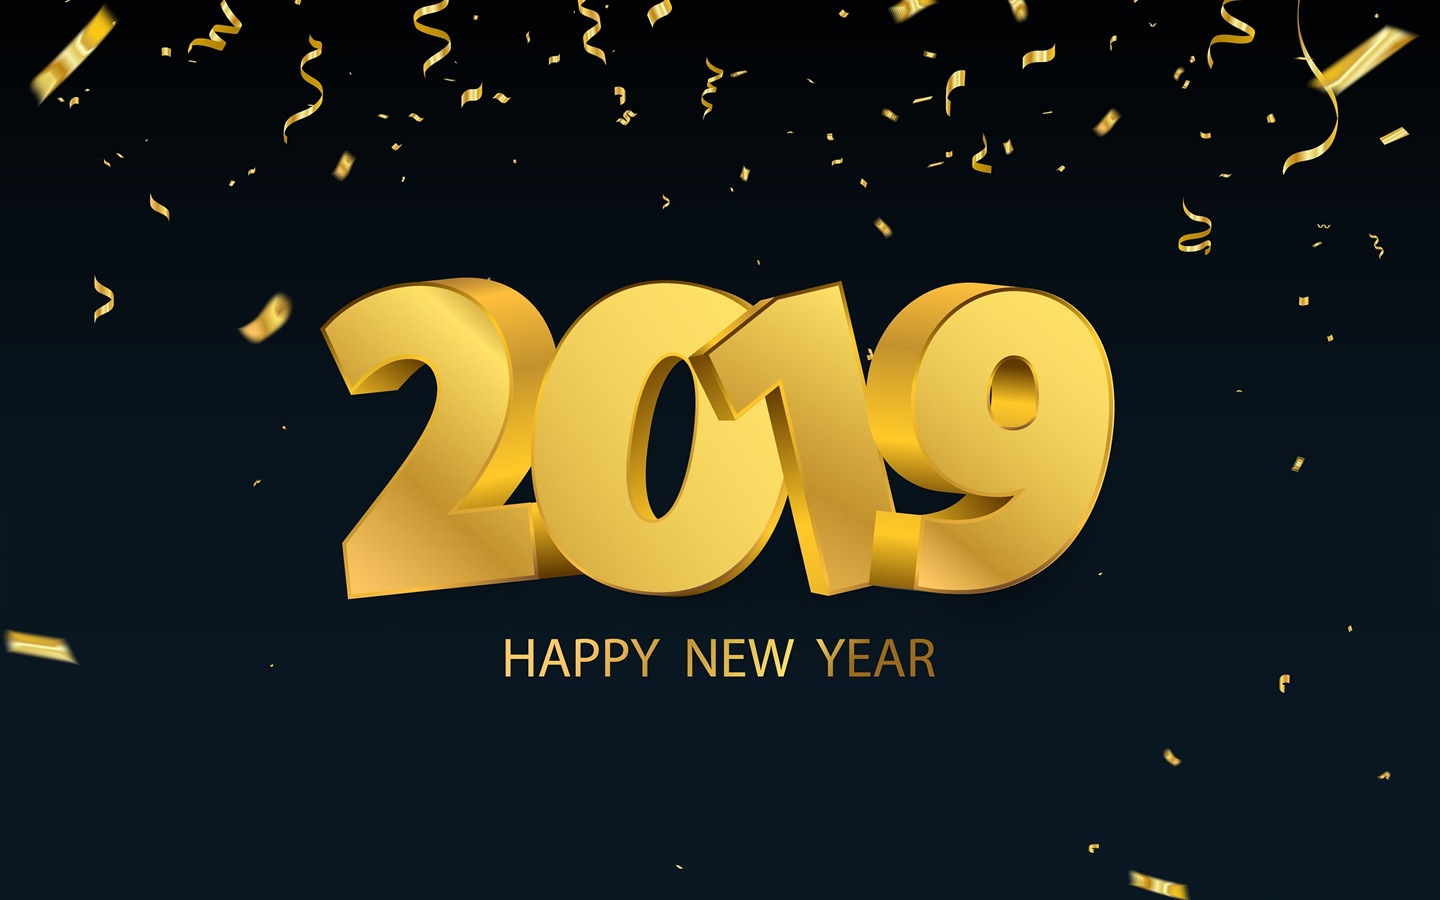 Happy New Year 2019 HD wallpapers #13 - 1440x900